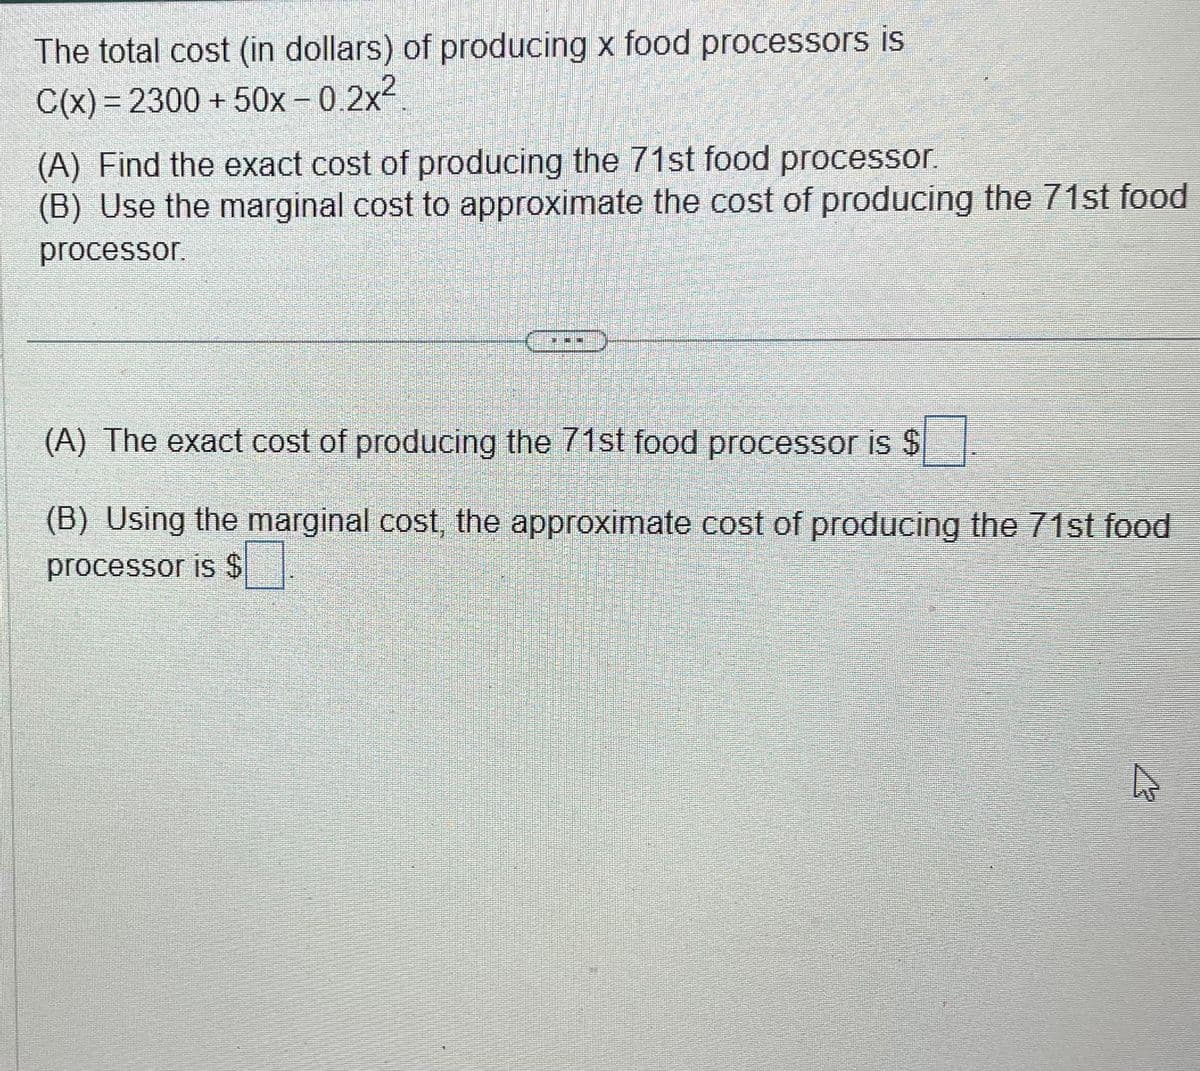 The total cost (in dollars) of producing x food processors is
C(x) = 2300 + 50x-0.2x²
(A) Find the exact cost of producing the 71st food processor.
(B) Use the marginal cost to approximate the cost of producing the 71st food
processor.
(A) The exact cost of producing the 71st food processor is $
(B) Using the marginal cost, the approximate cost of producing the 71st food
processor is $